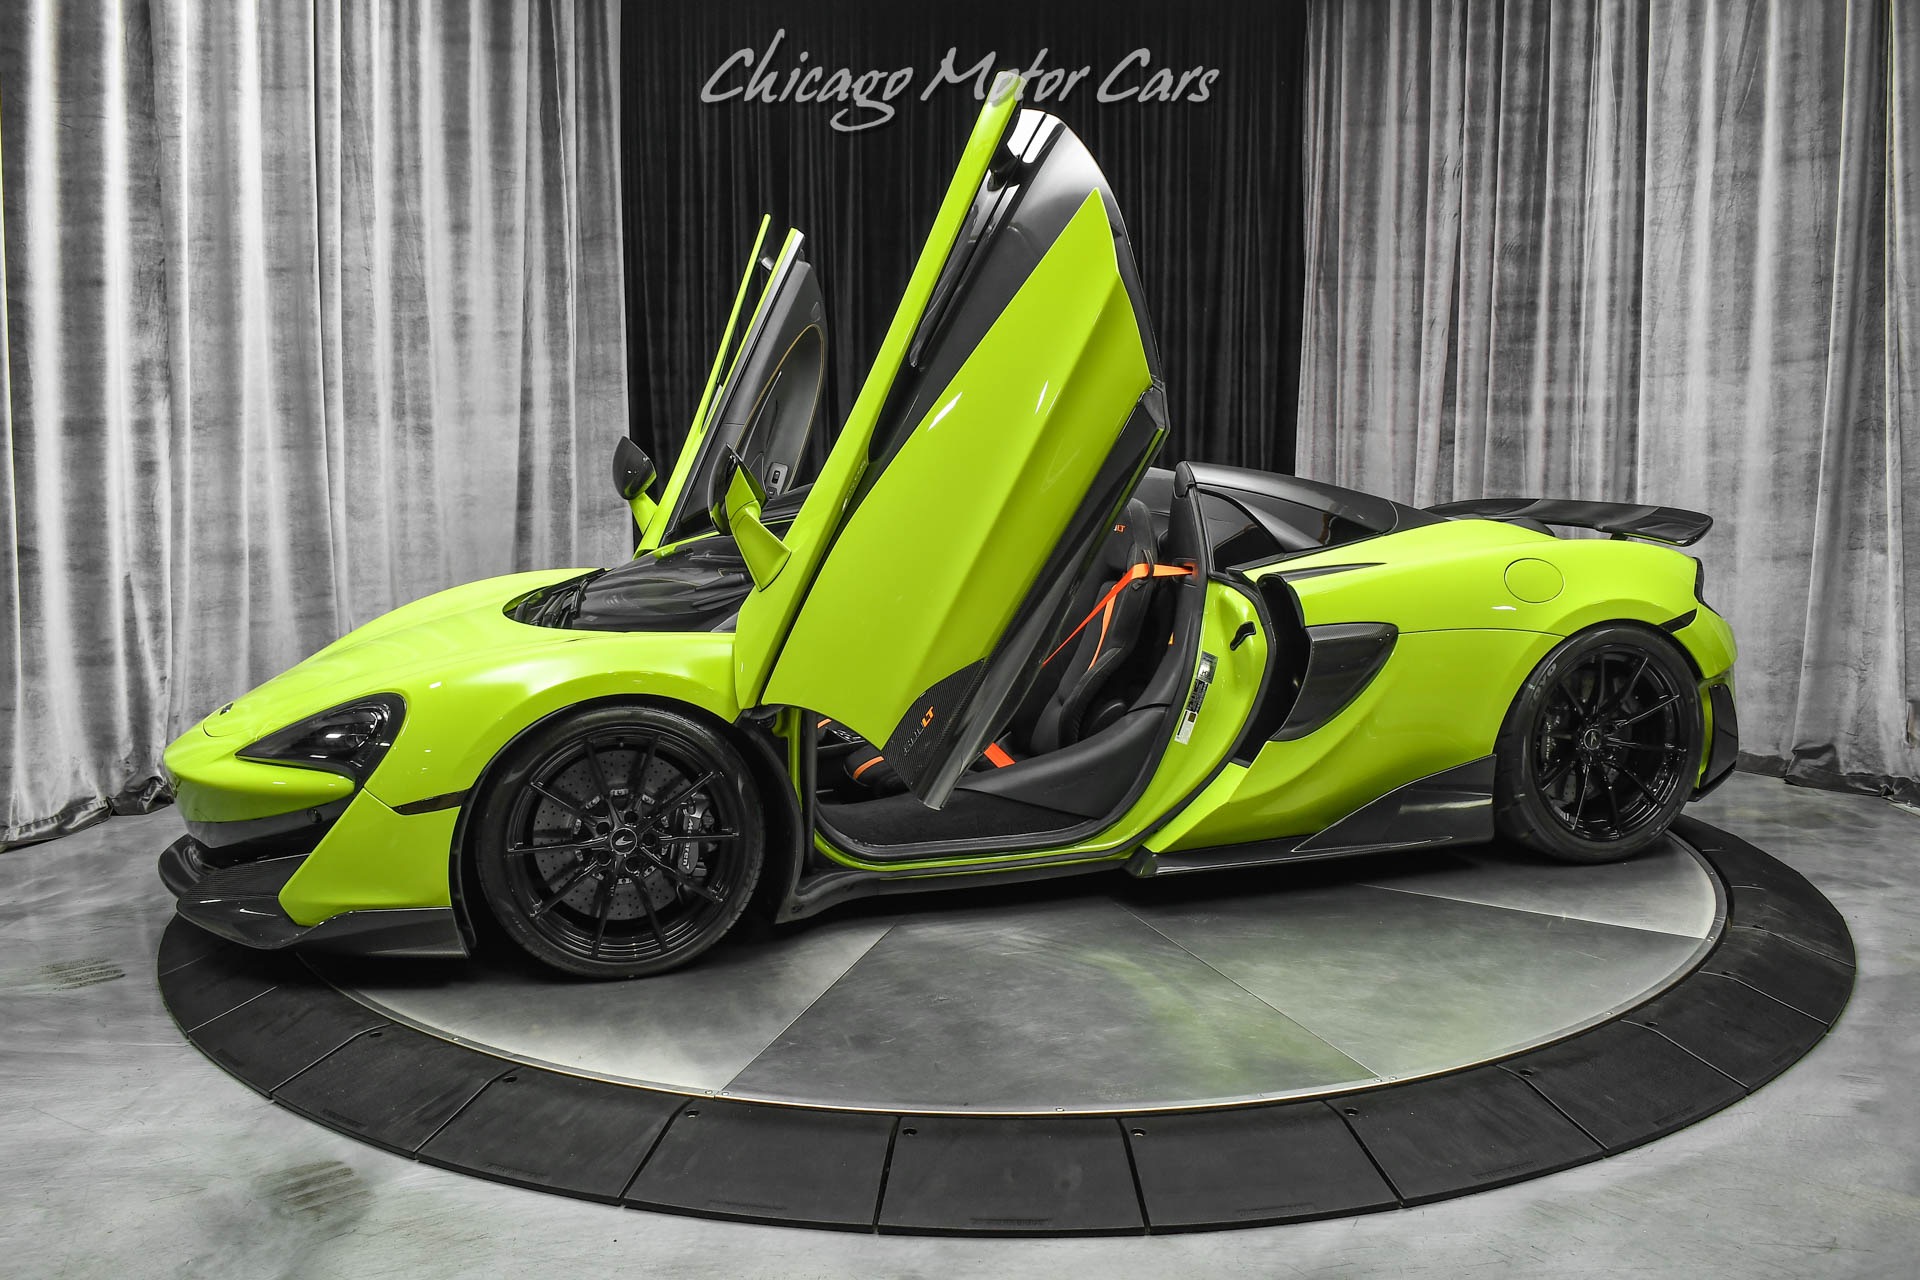 Used-2020-McLaren-600LT-Spider-Convertible-TONS-of-Carbon-Front-Lift-Limited-Edition-FULL-PPF-LOADED